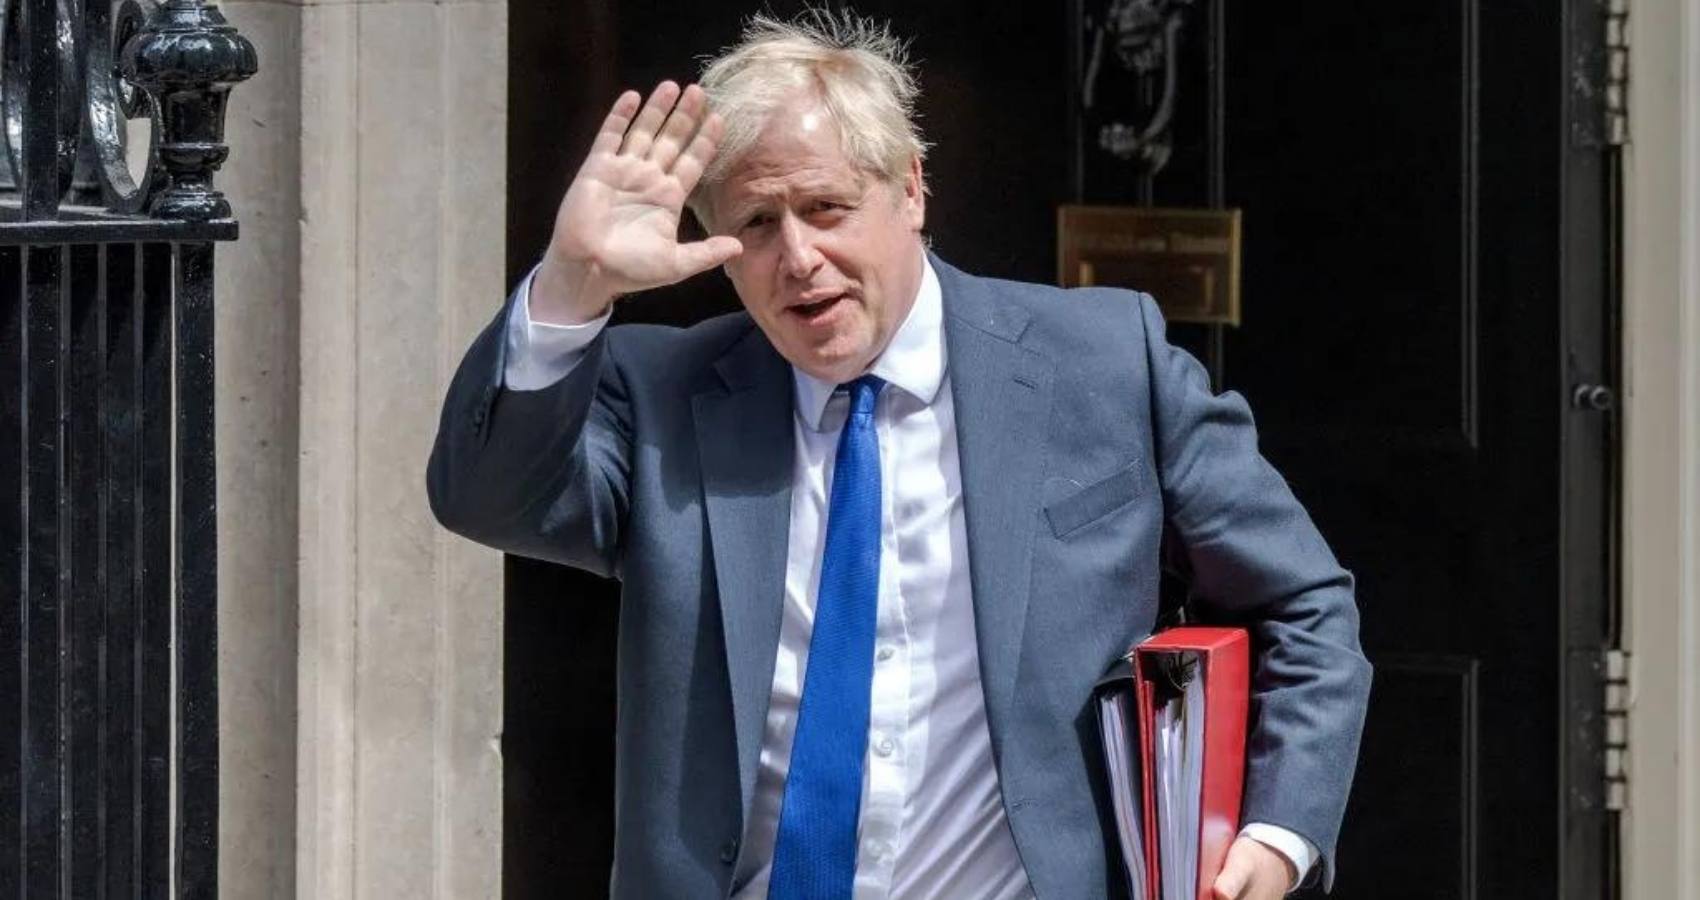 After Boris Johnson Quits, Who Will Replace Him As PM of UK?